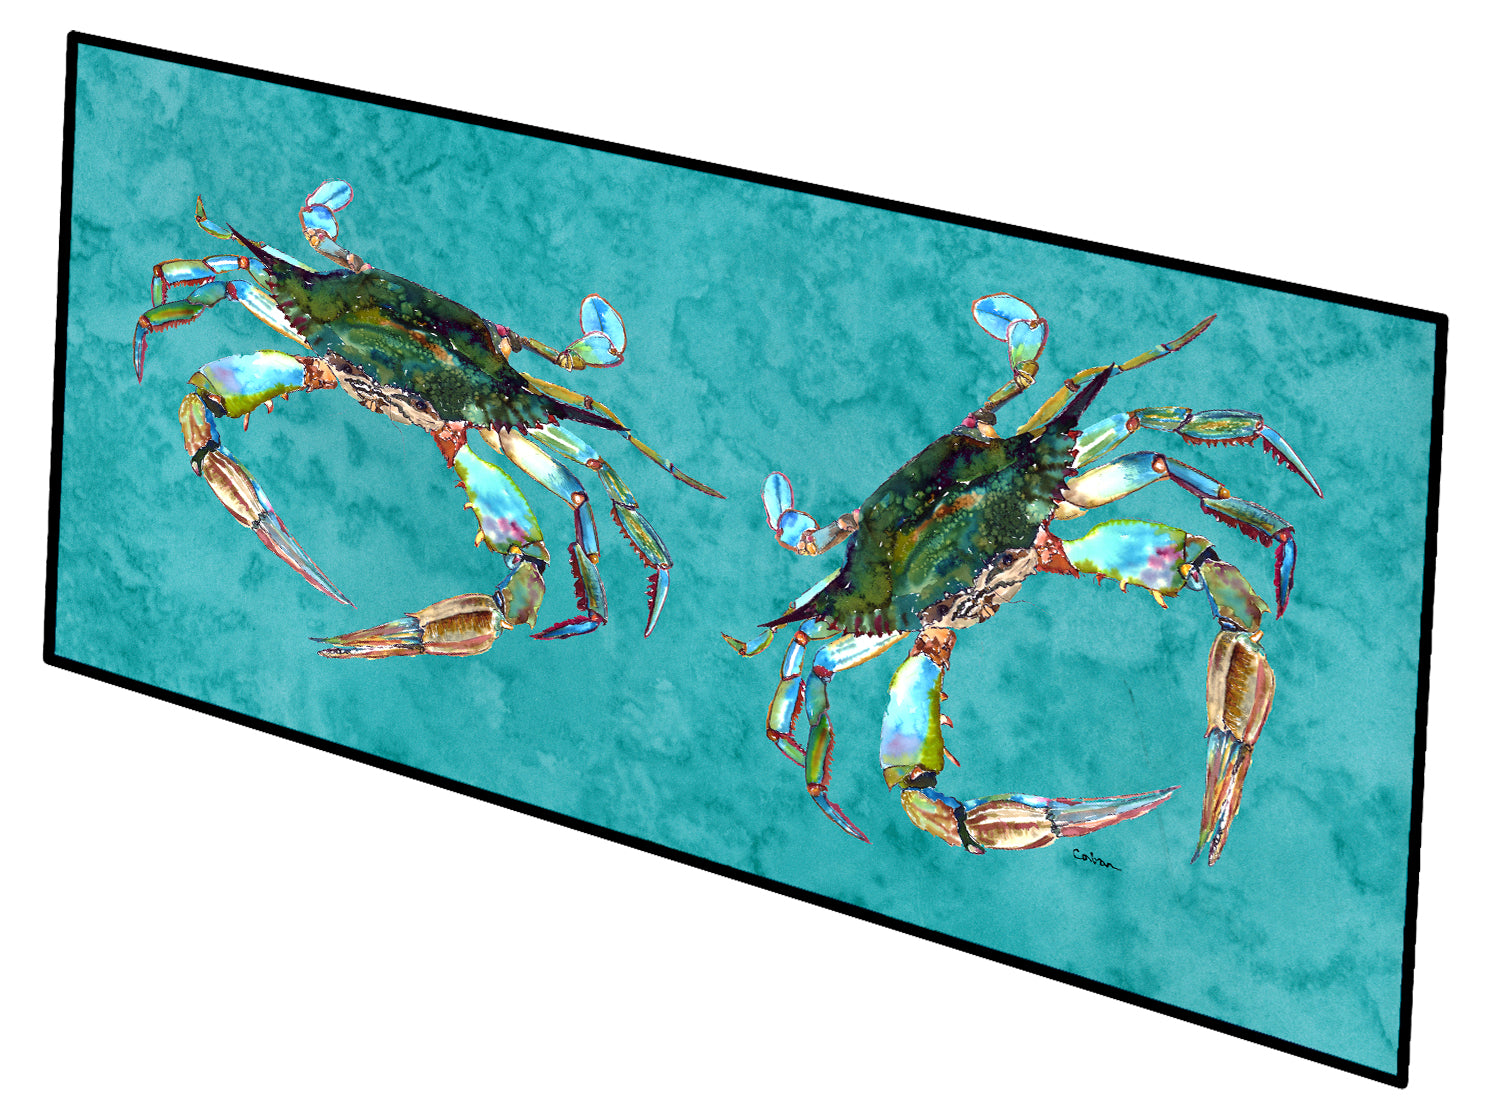 Blue Crab on Teal Indoor or Outdoor Runner Mat 28x58 - the-store.com